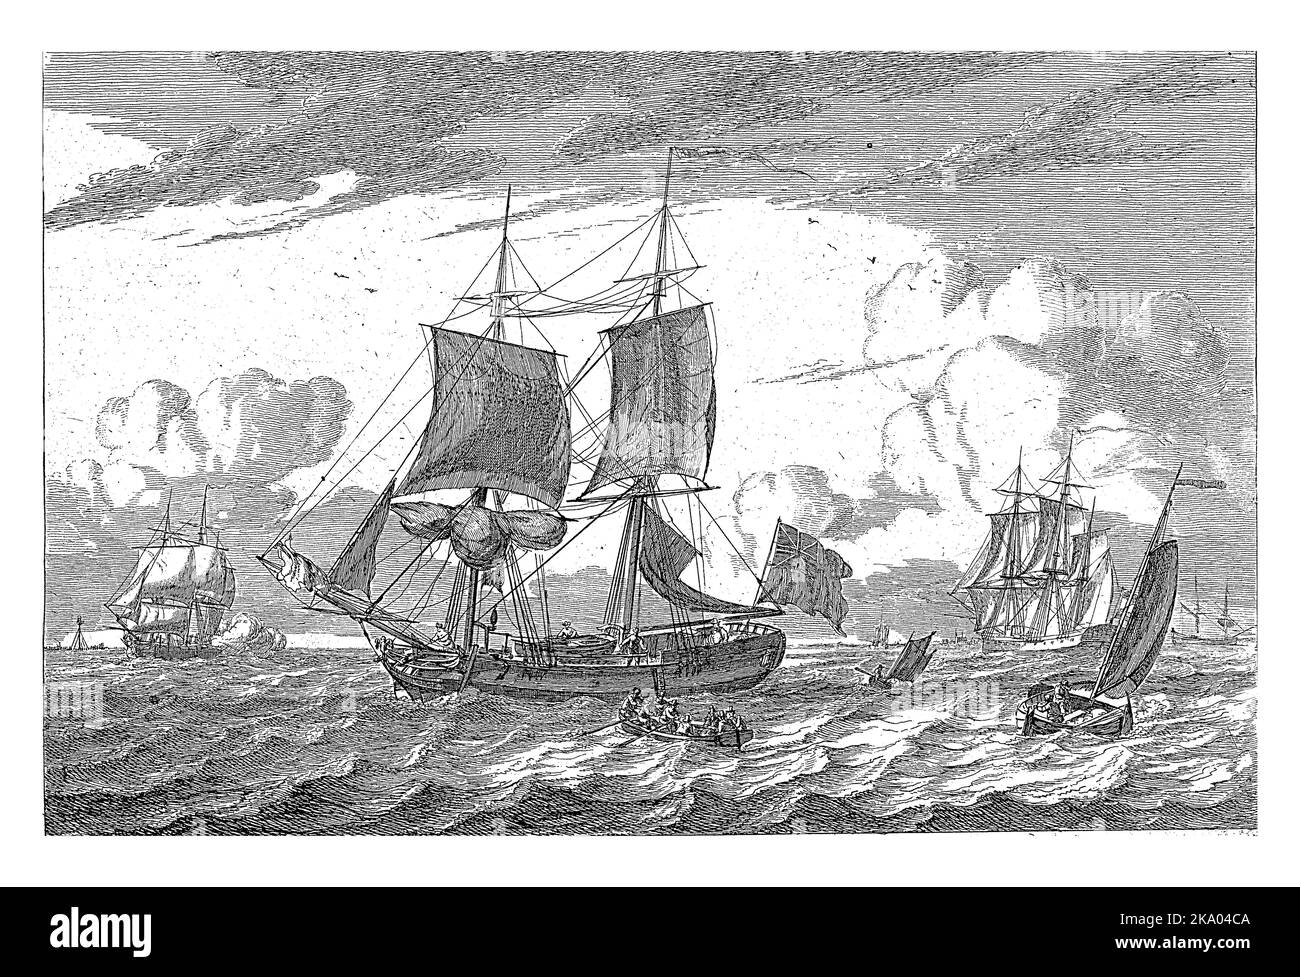 Several sailing ships on choppy water. In the foreground a two-master with an English flag. There is a sloop on the deck of the boat. Stock Photo